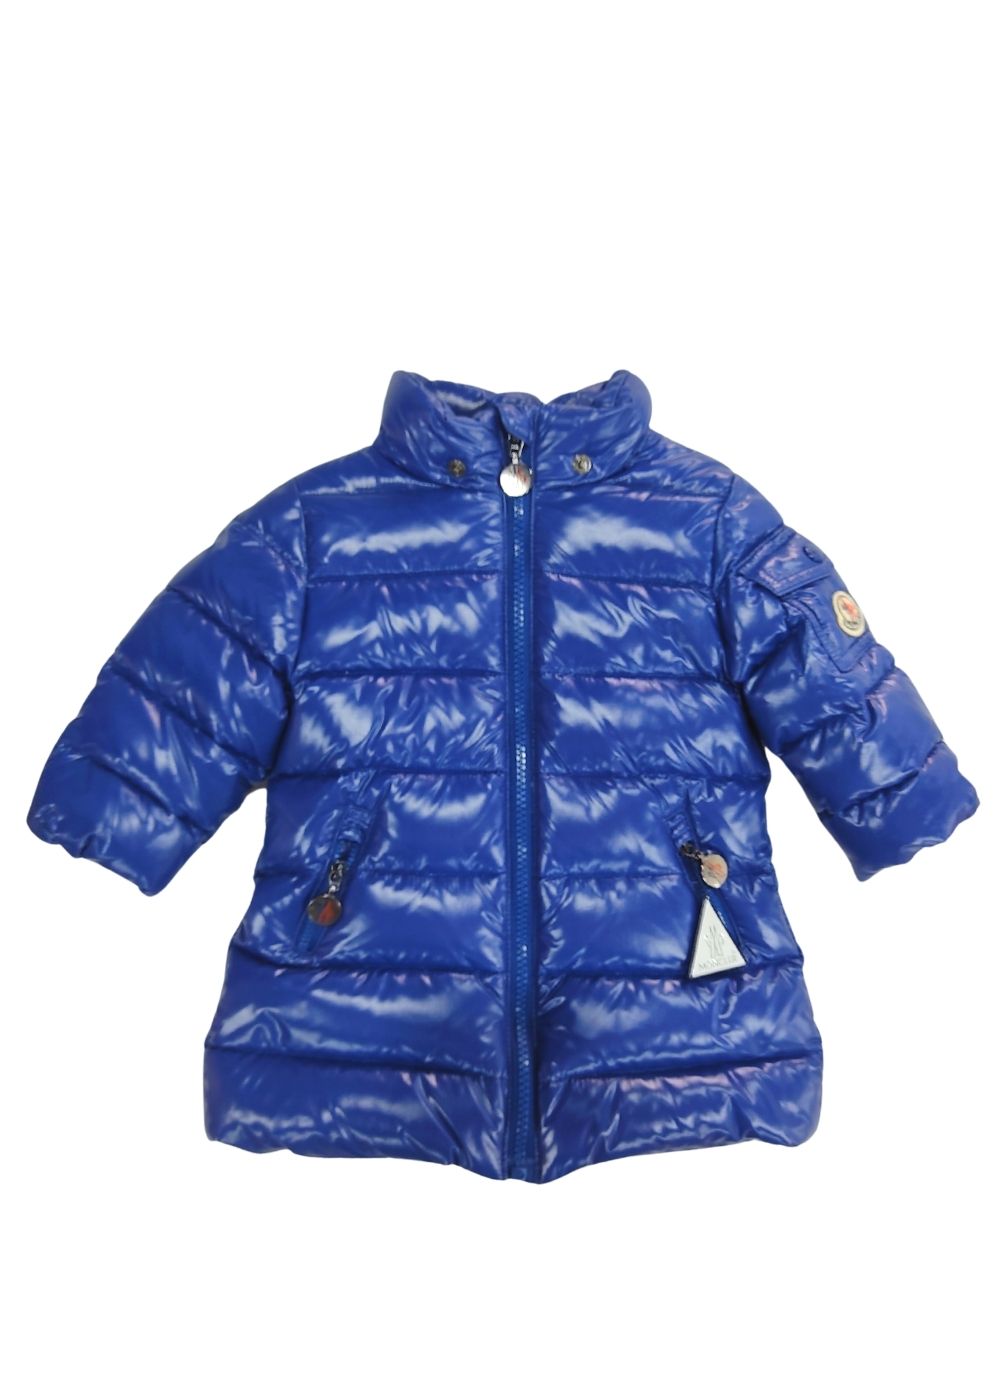 Featured image for “MONCLER PIUMINO BLUETTE”